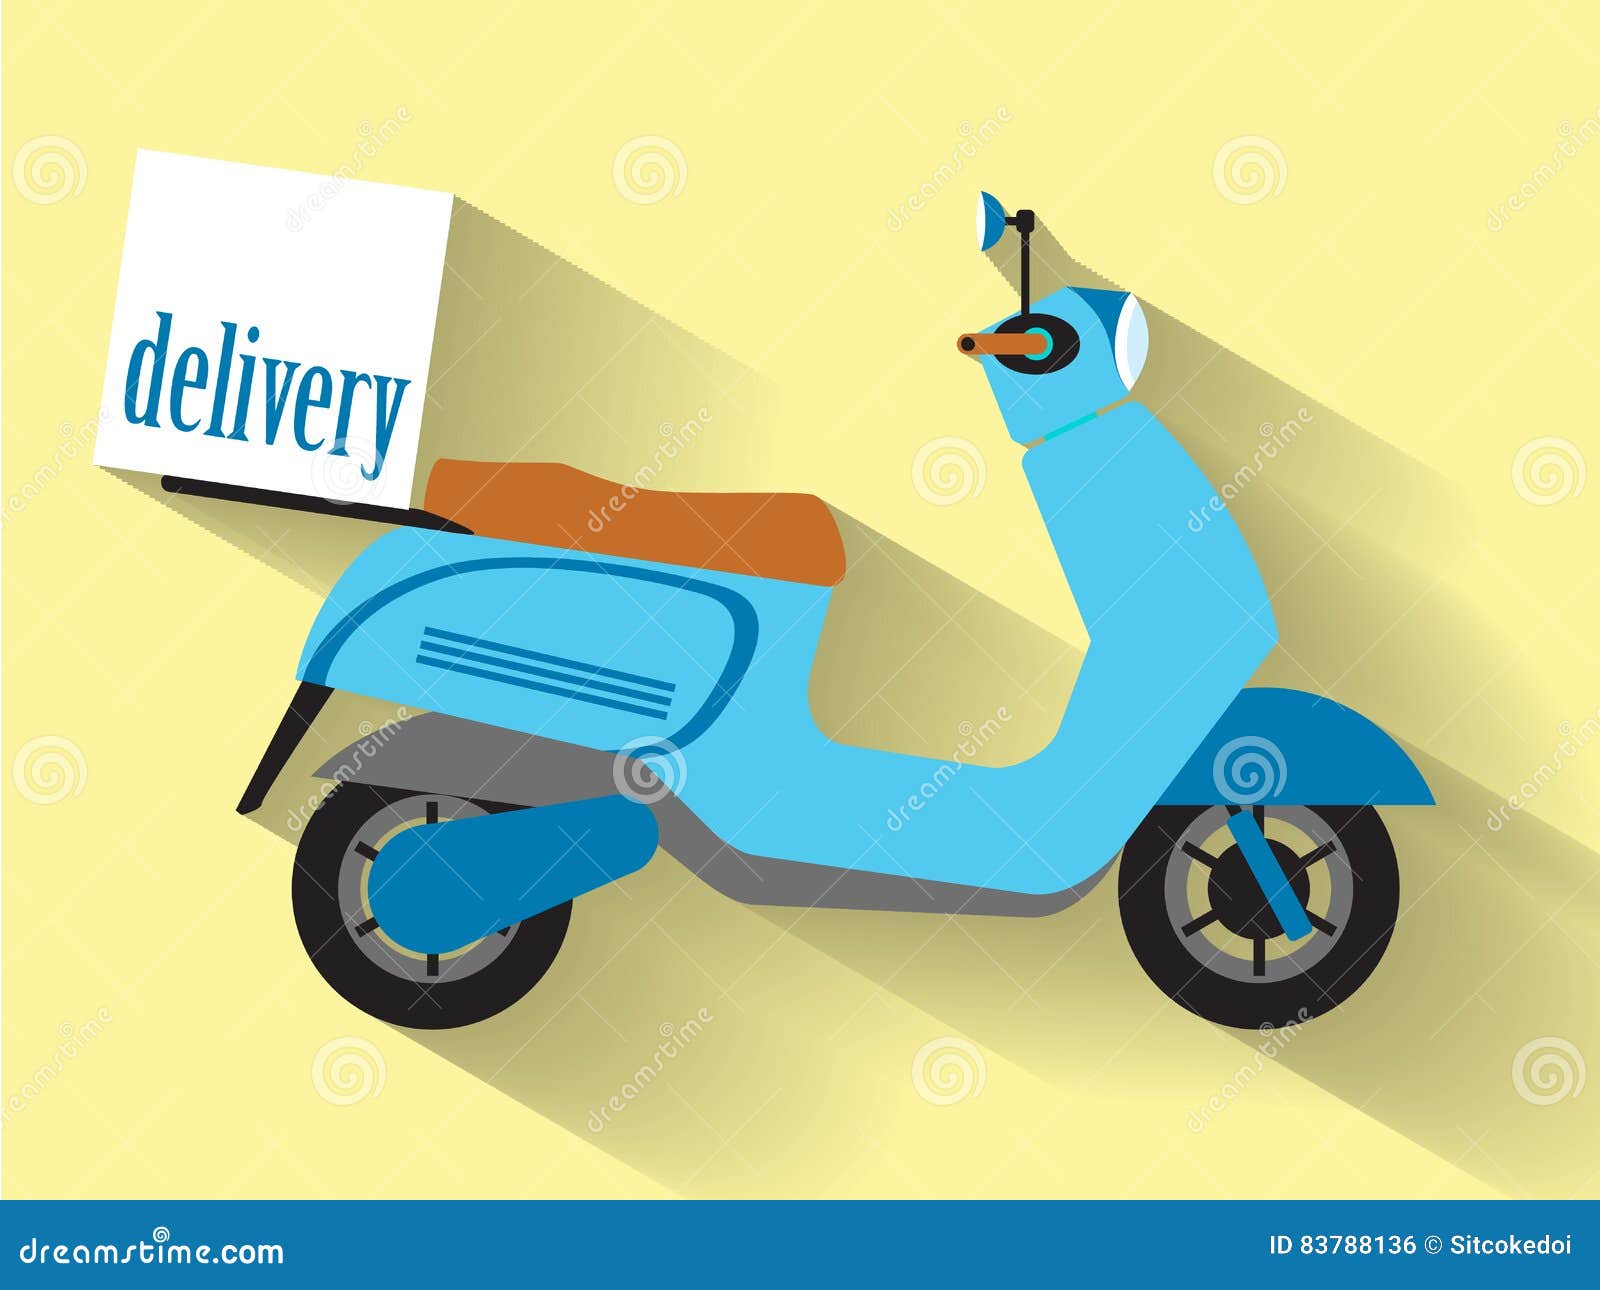 Download Motorcycle Box Transportation Delivery Shipping Stock ...